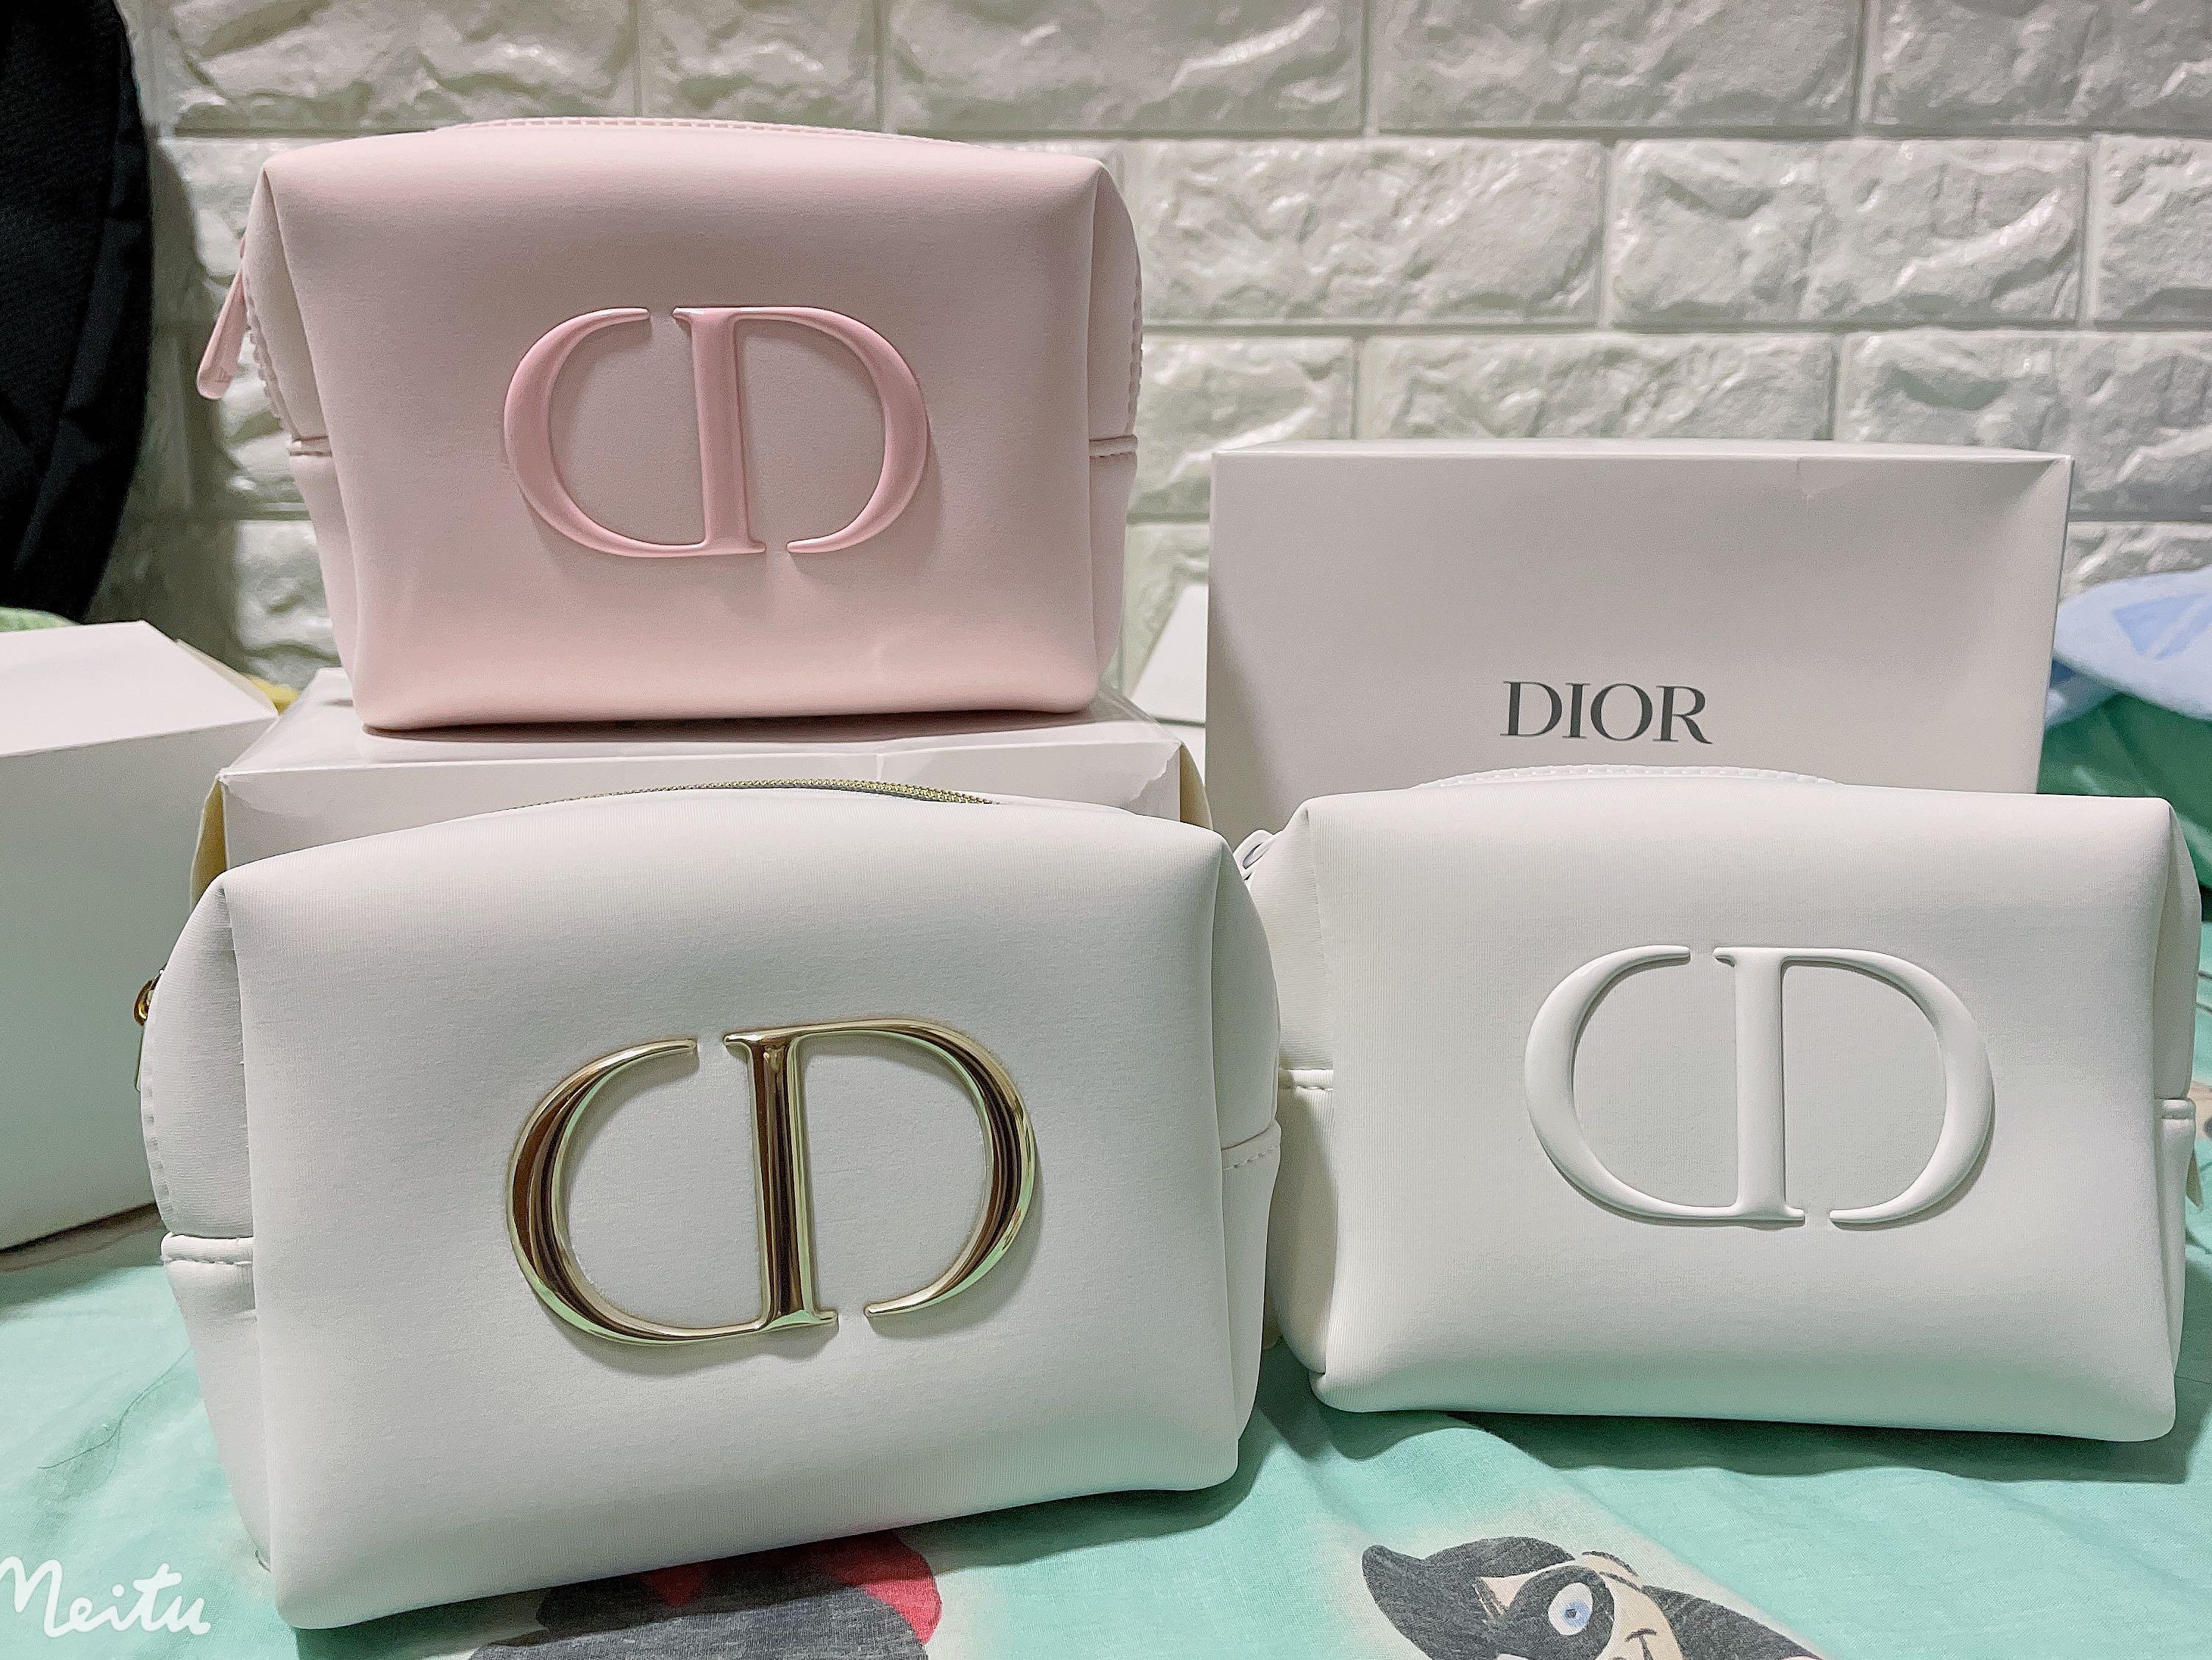 CD Dior Beauty Pink Makeup Cosmetics Bag / Pouch / Clutch / Case, Brand NEW!